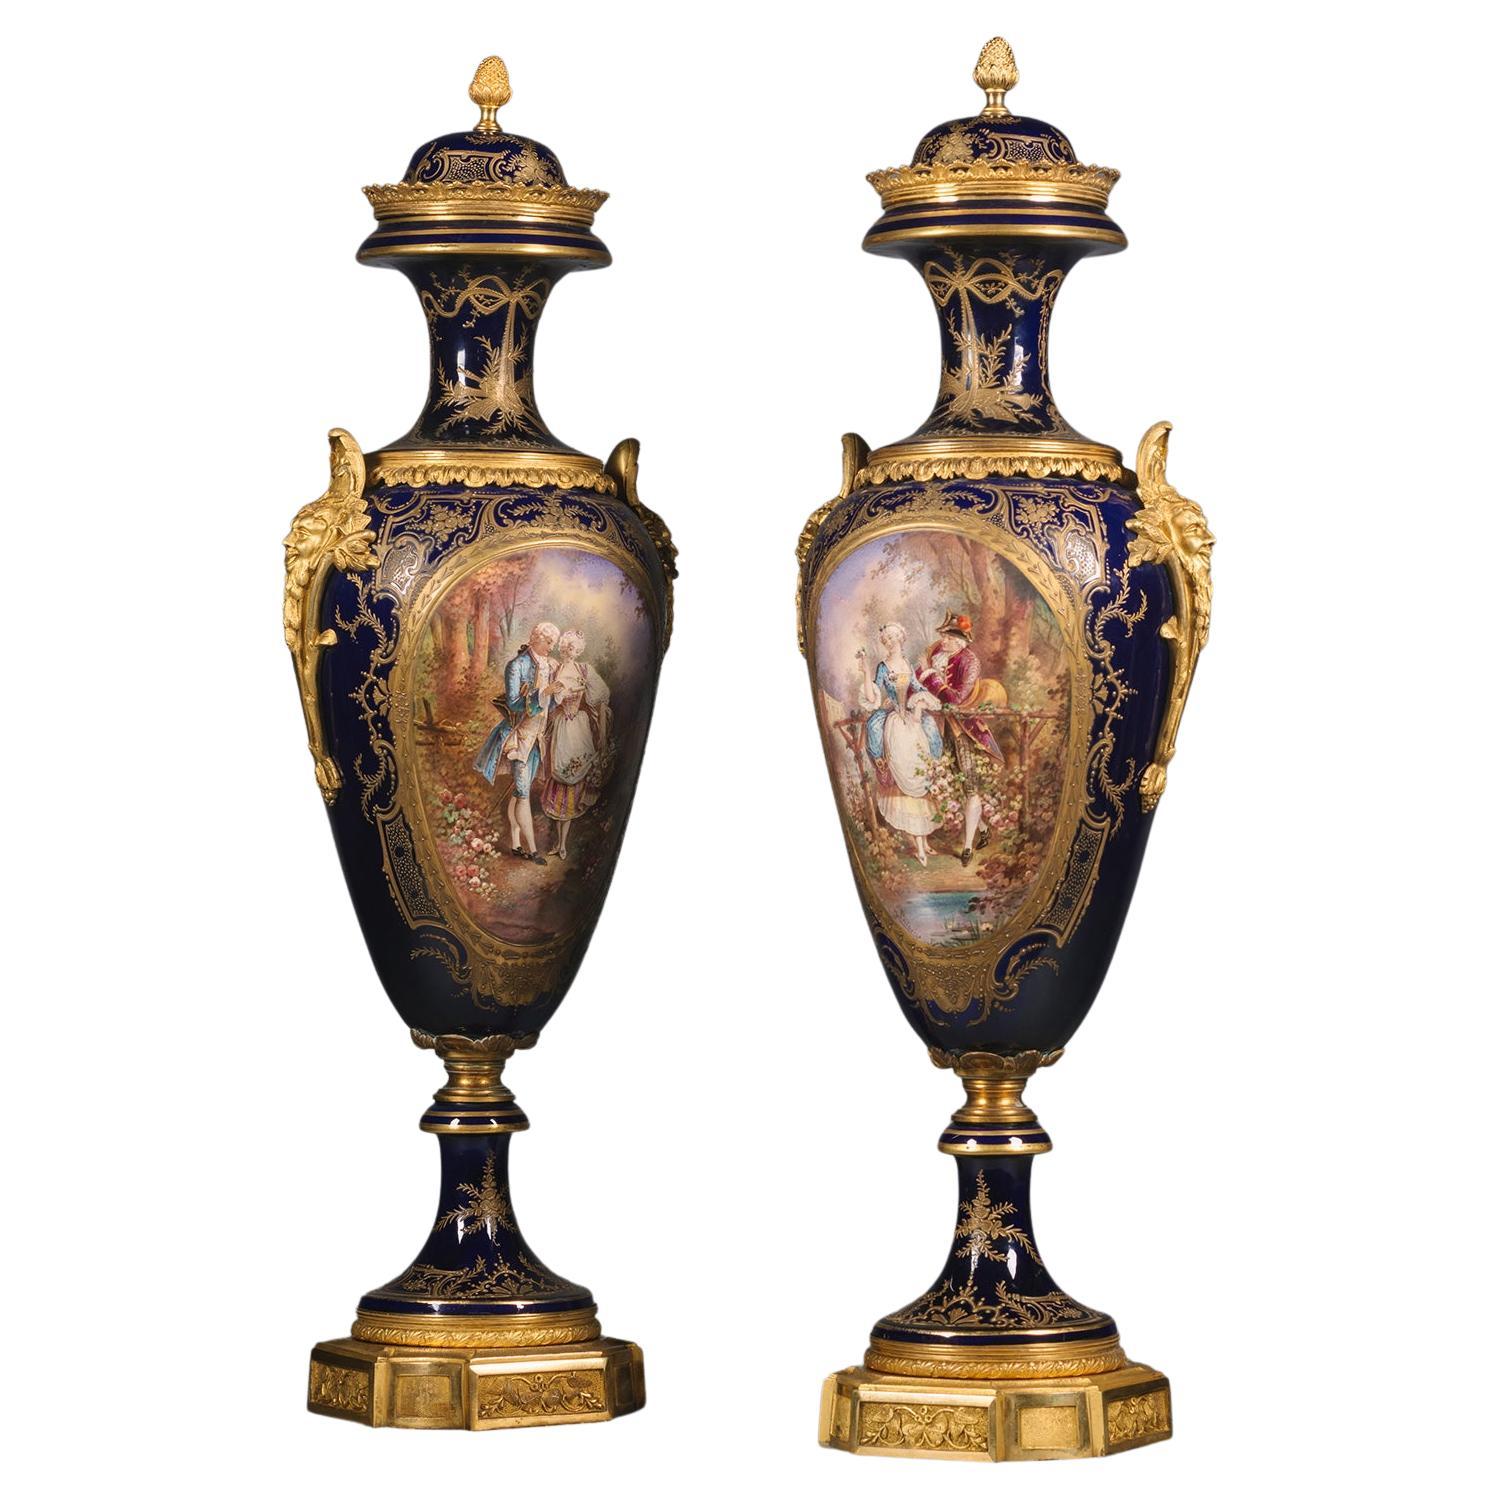 Pair of Gilt-Bronze Mounted Sèvres Style Porcelain Vases and Covers